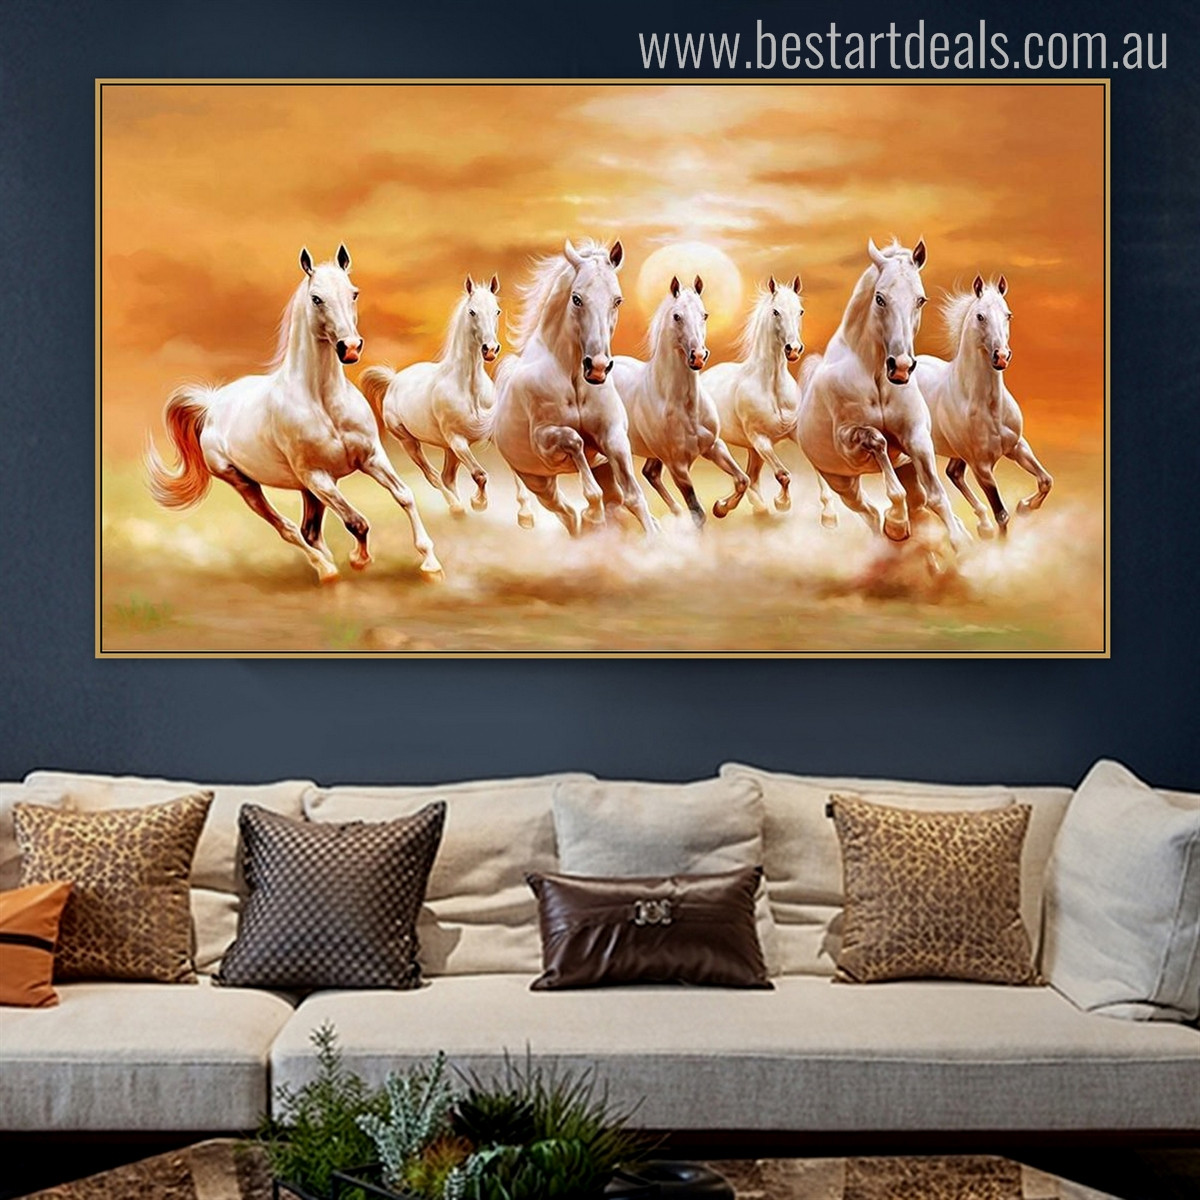 Group of Horses Animal Modern Painting Canvas Print for Living Room Wall Getup